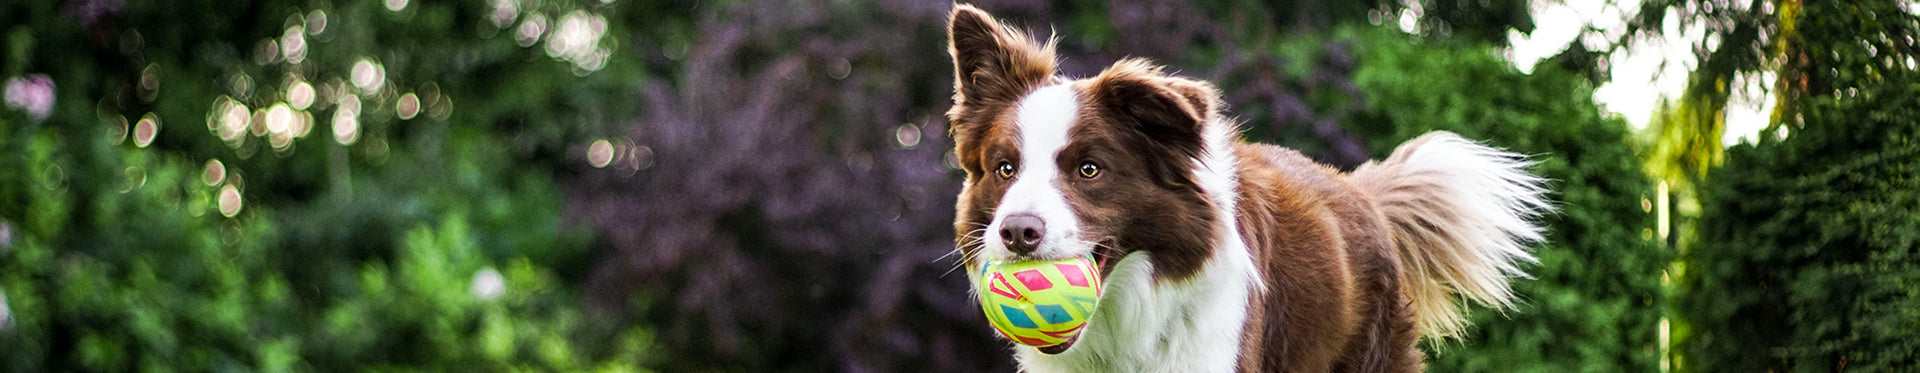 Border collie carrying a yellow ball in its mouth outdoors